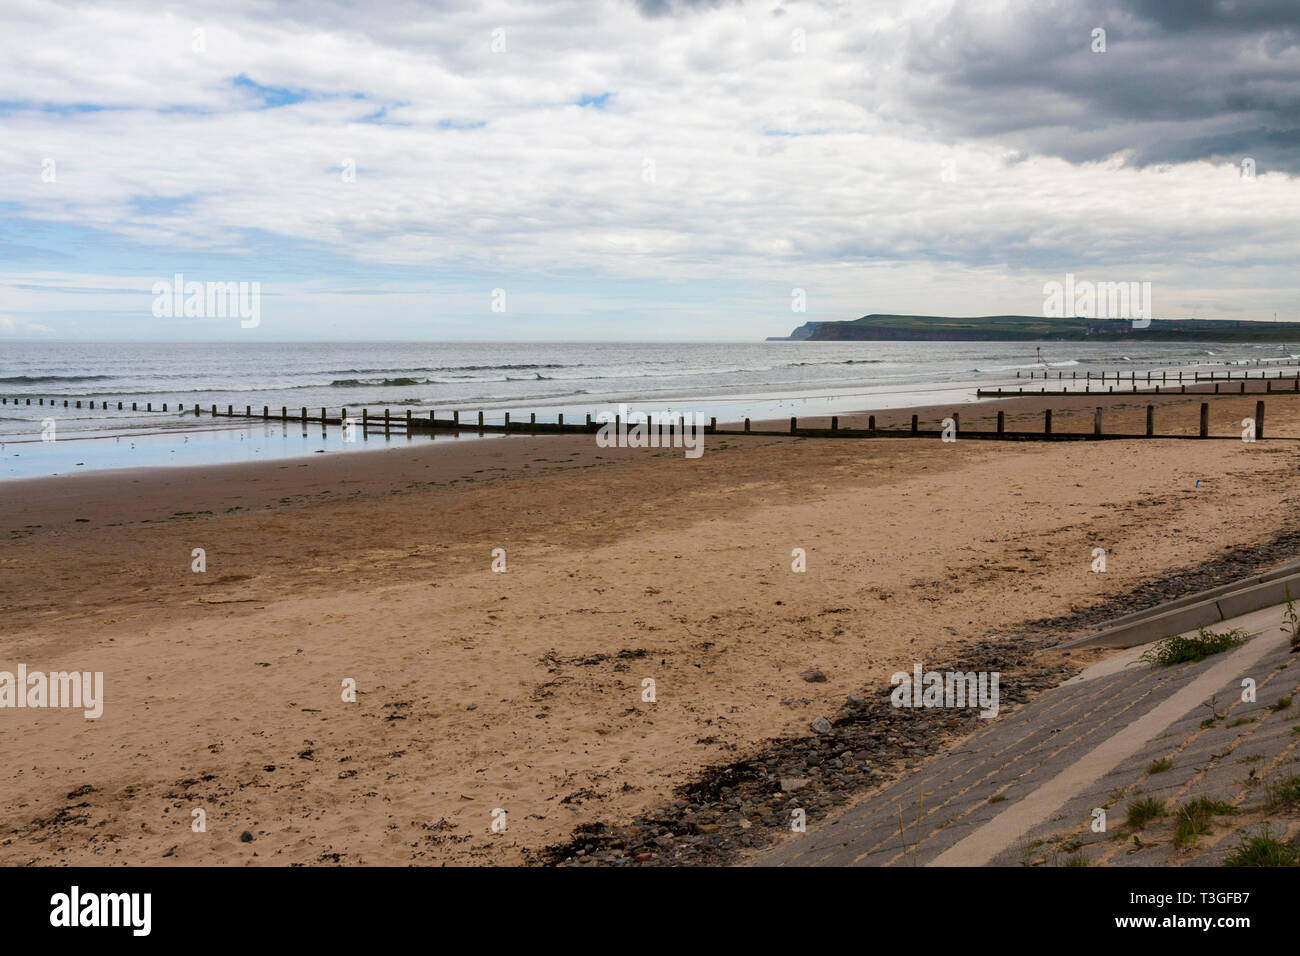 A view of the groins and incoming tide on the beach at Redcar in north east  England Stock Photo - Alamy